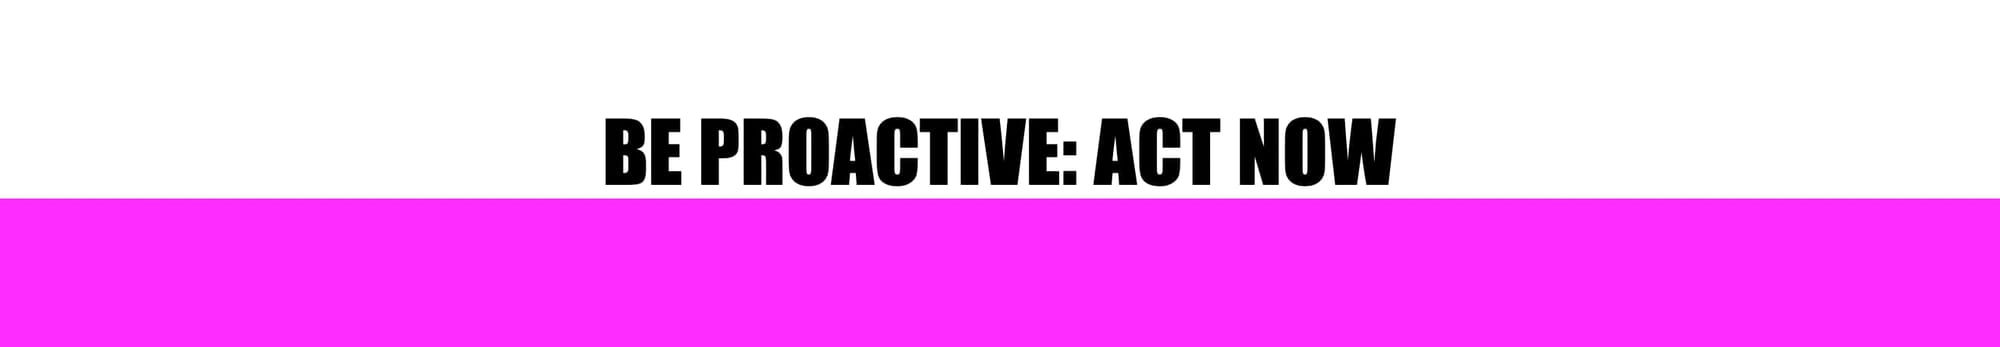 HEADER: BE PROACTIVE: ACT NOW